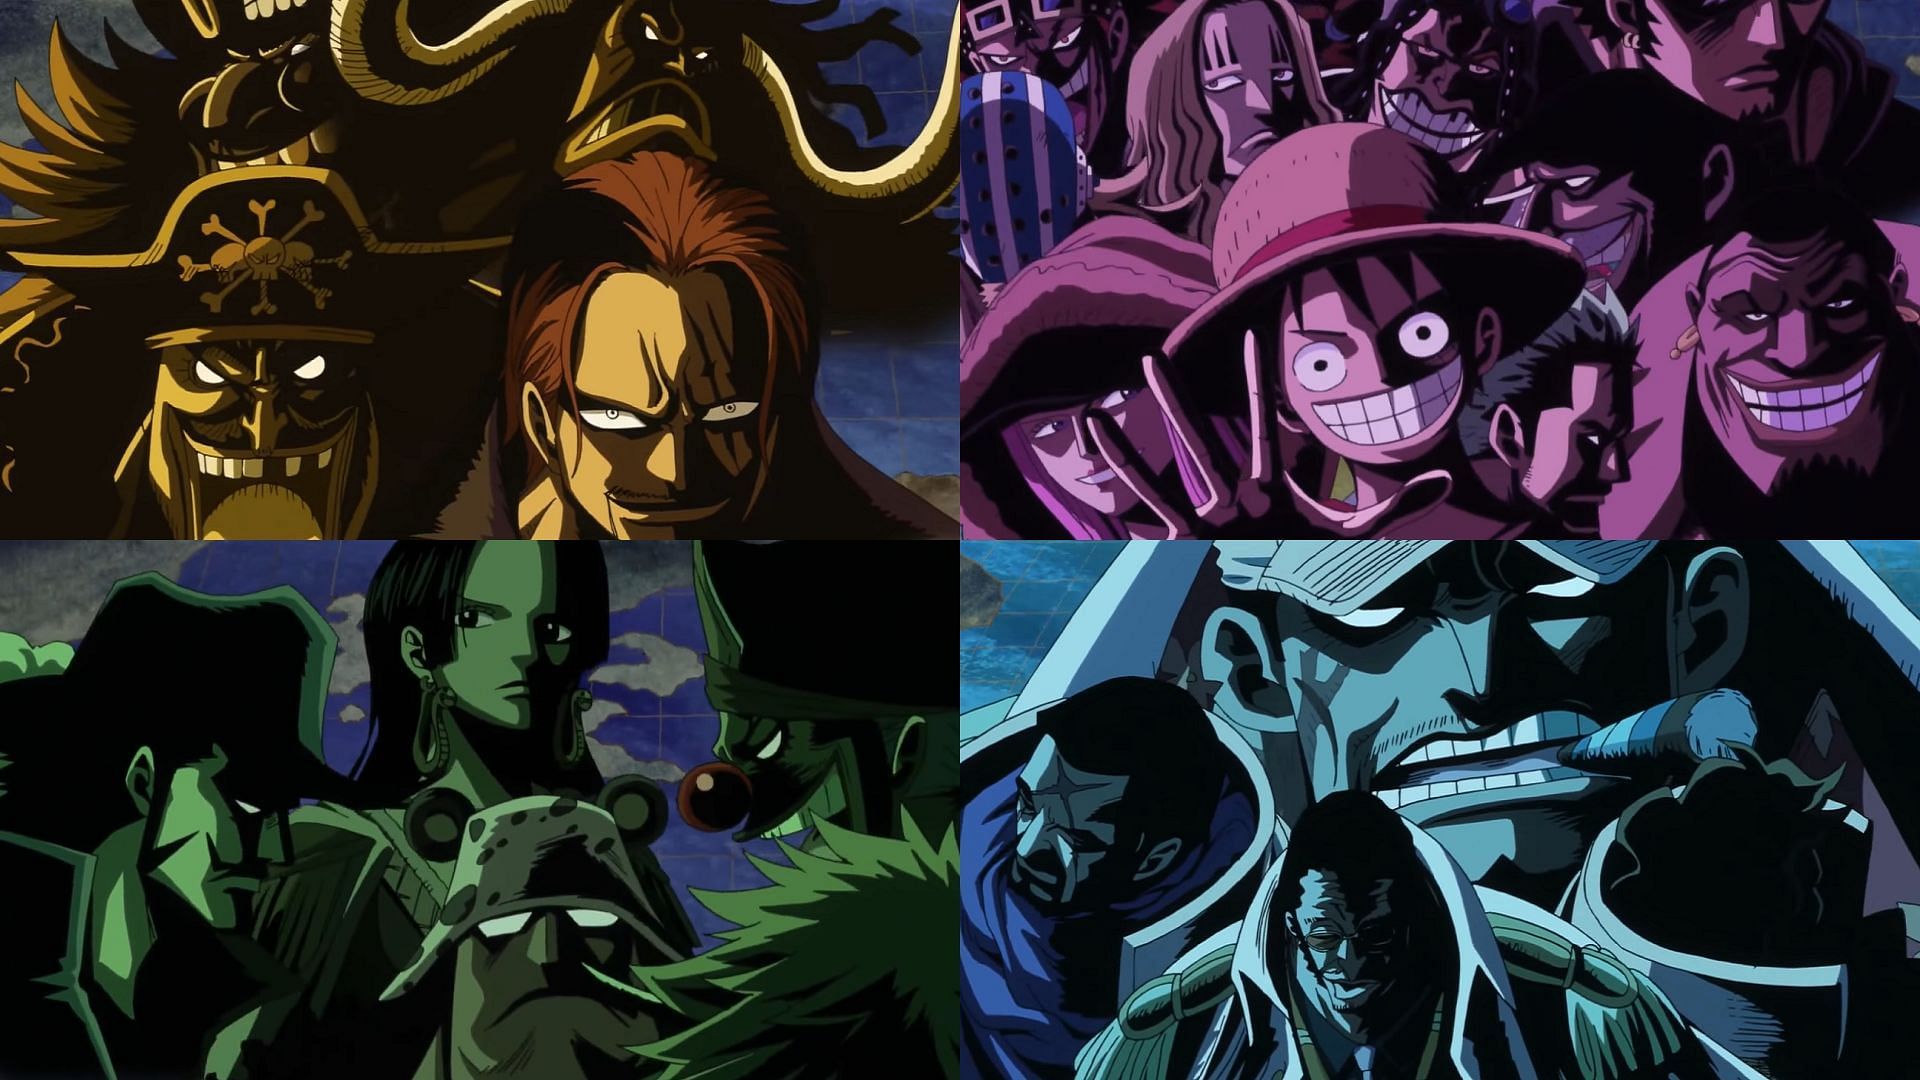 This battle royale should involve the currently most powerful individuals of the One Piece world (Image via Toei Animation, One Piece)